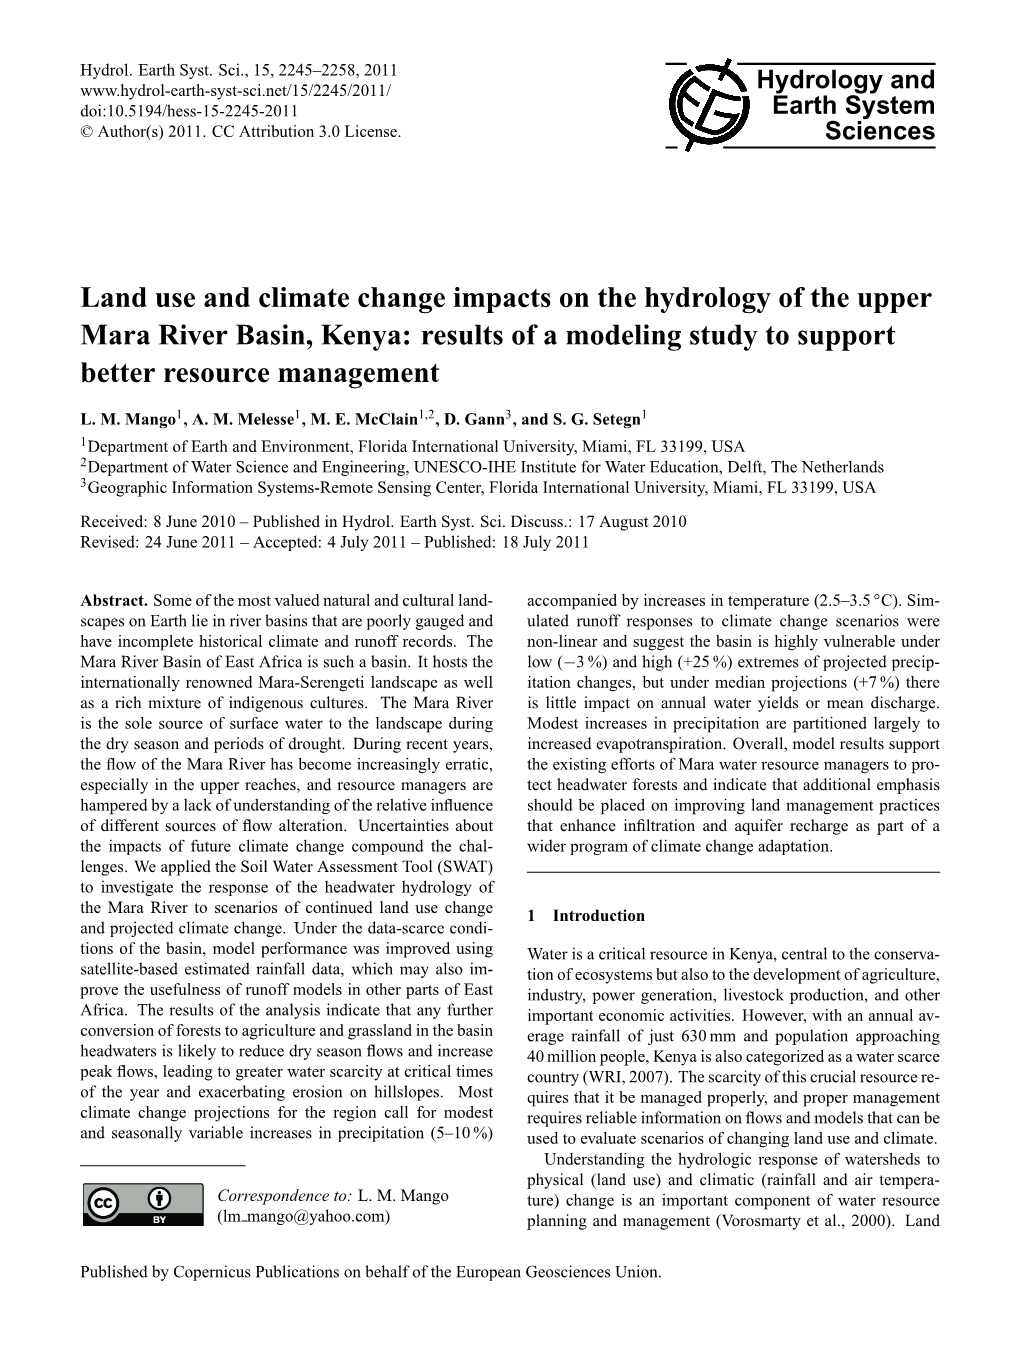 Land Use and Climate Change Impacts on the Hydrology of the Upper Mara River Basin, Kenya: Results of a Modeling Study to Support Better Resource Management